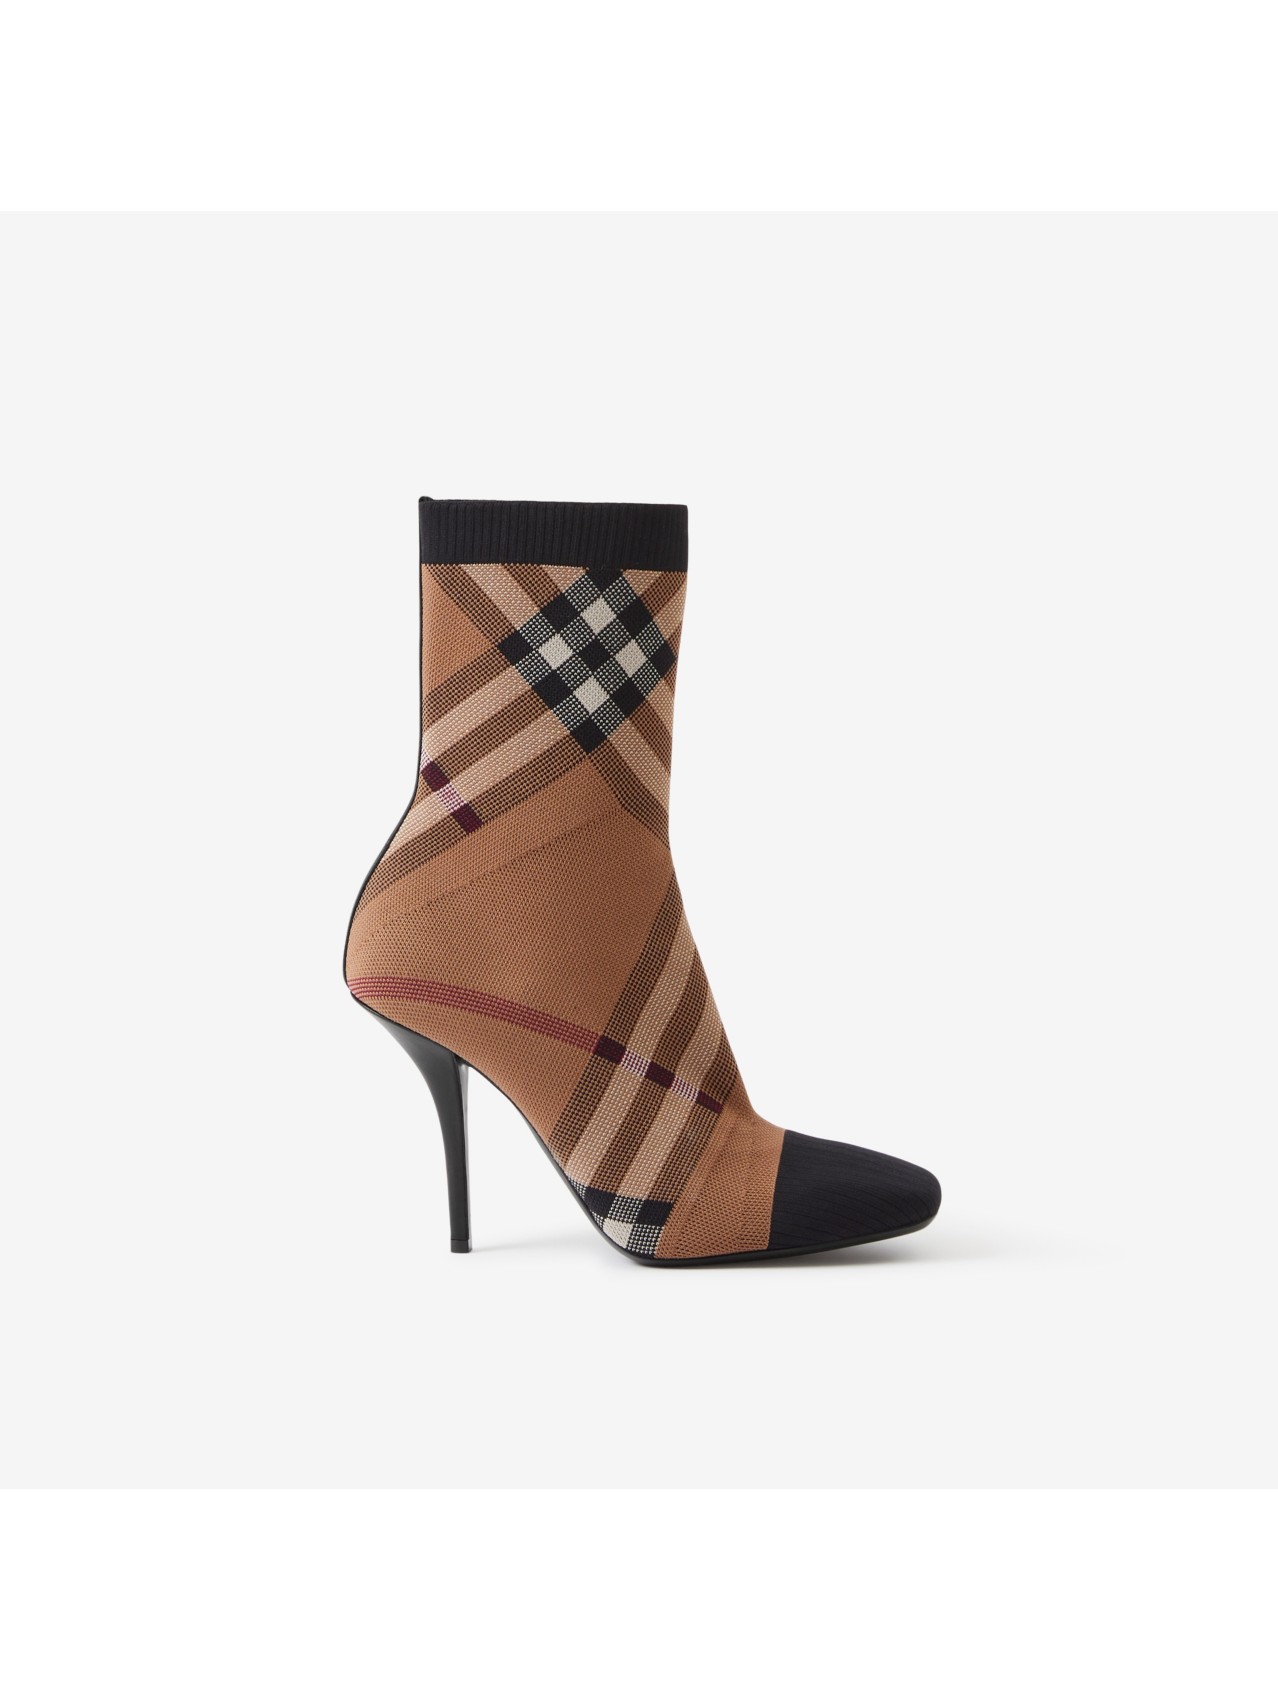 Women's Designer Boots | Ankle & Knee-high Boots | Burberry® Official